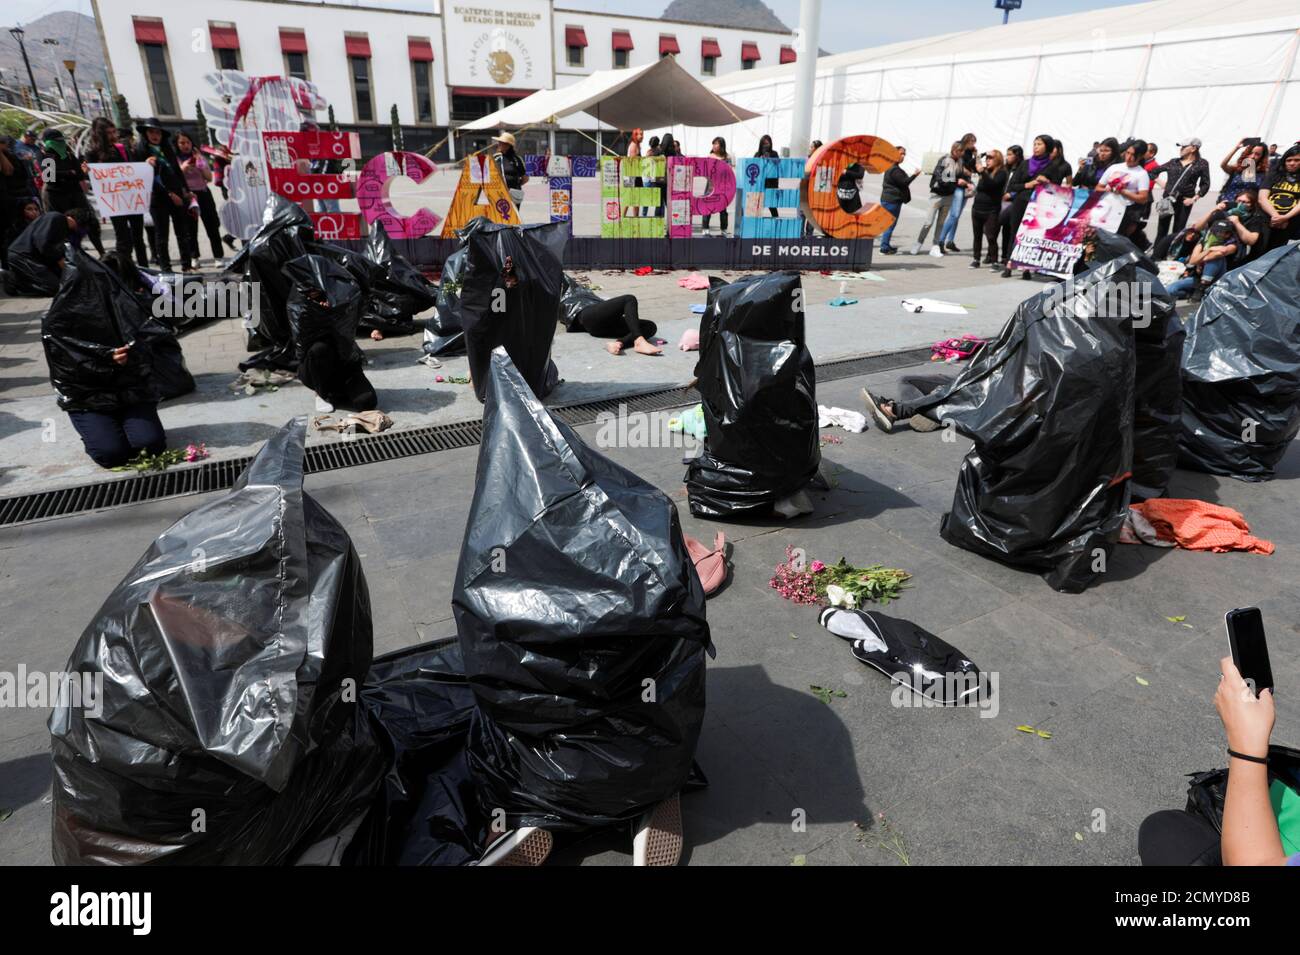 Women stage a performance to mark International Women's Day and to demand justice for the victims of gender violence and femicides, in Ecatepec, on the outsides of Mexico City, Mexico March 8, 2020. REUTERS/Luisa Gonzalez Stock Photo